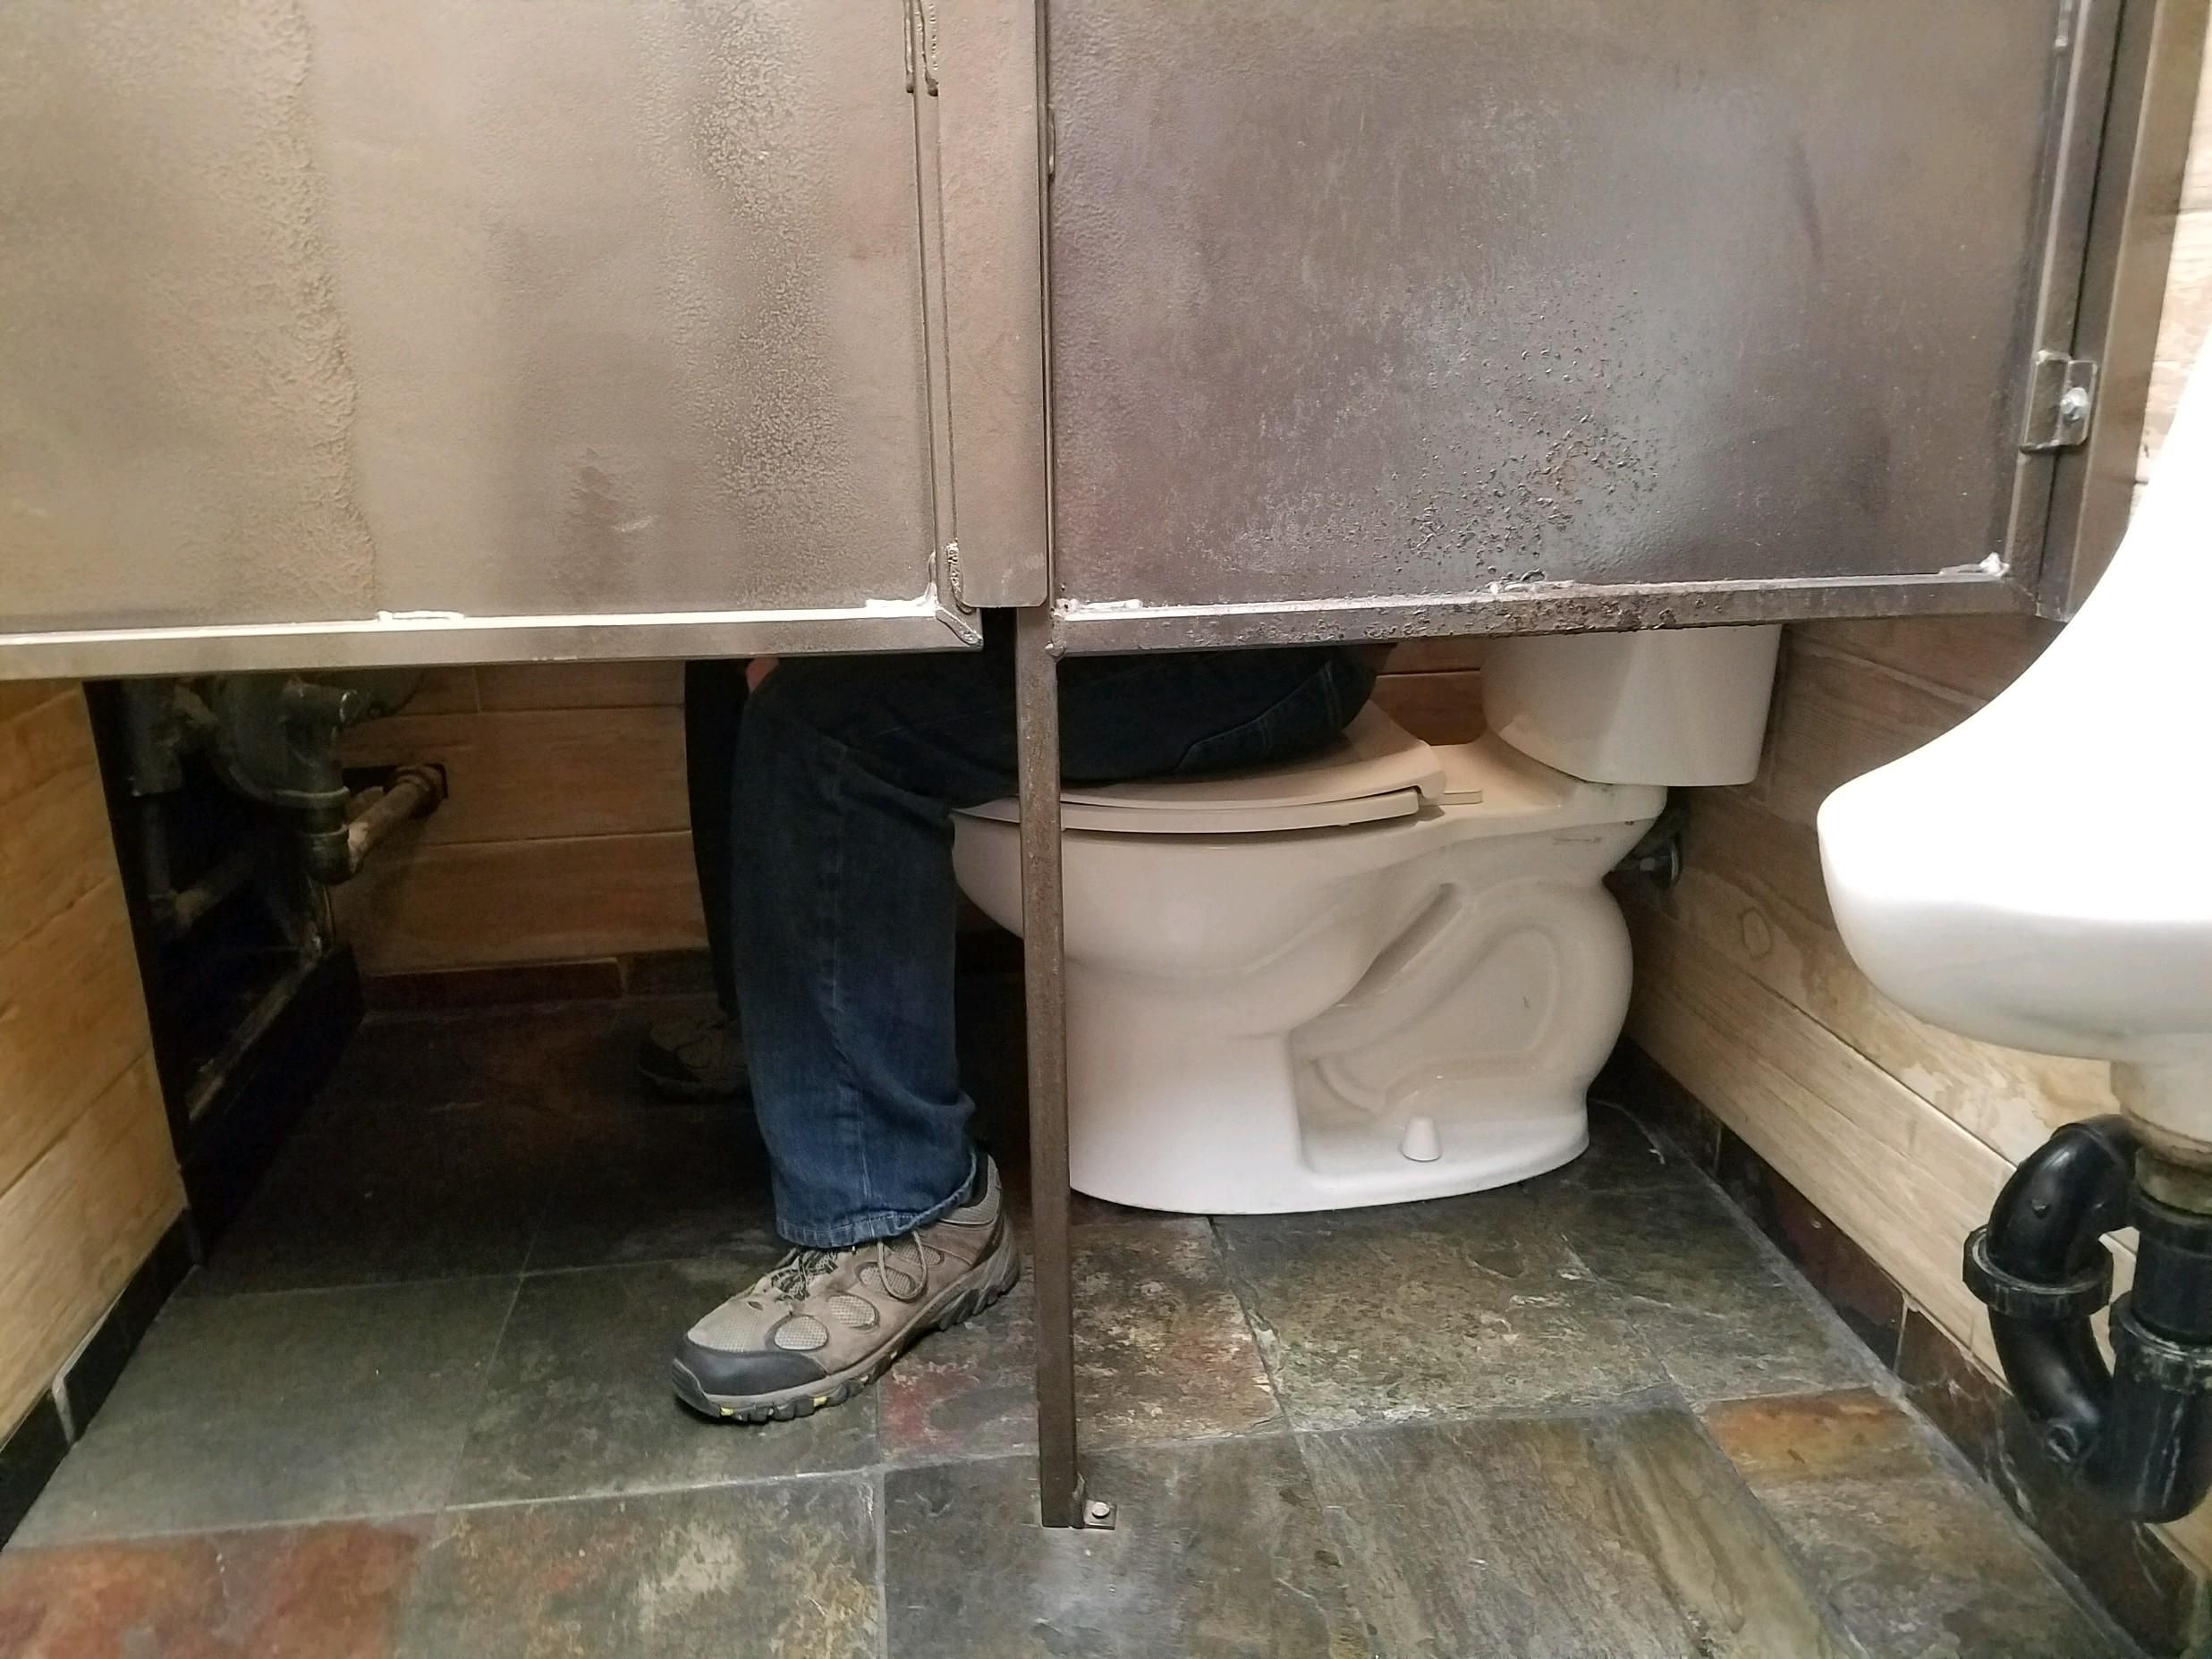 The private bathroom stall at our local bar